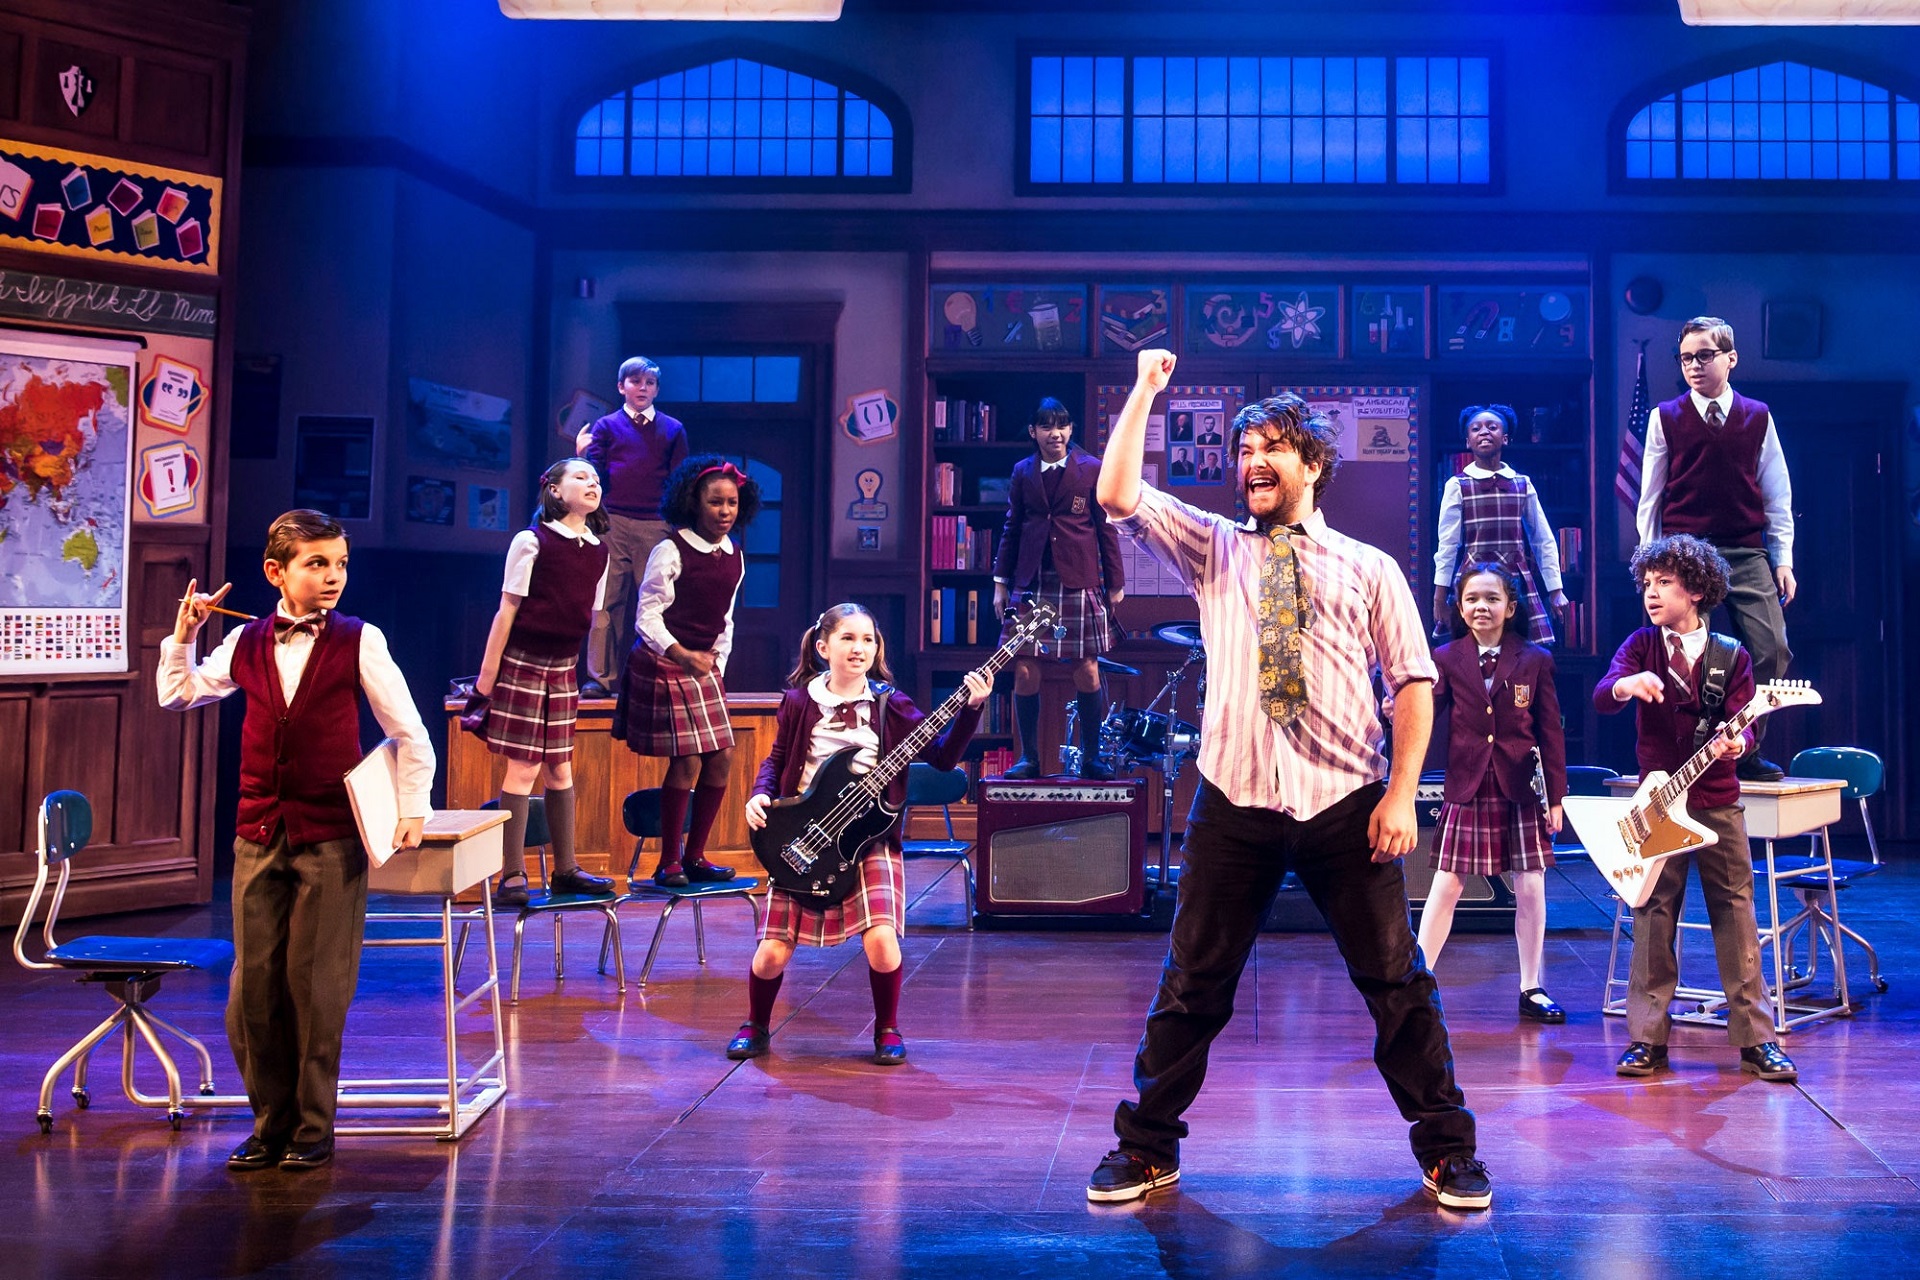 Broadway Comedy Musical: The School of Rock